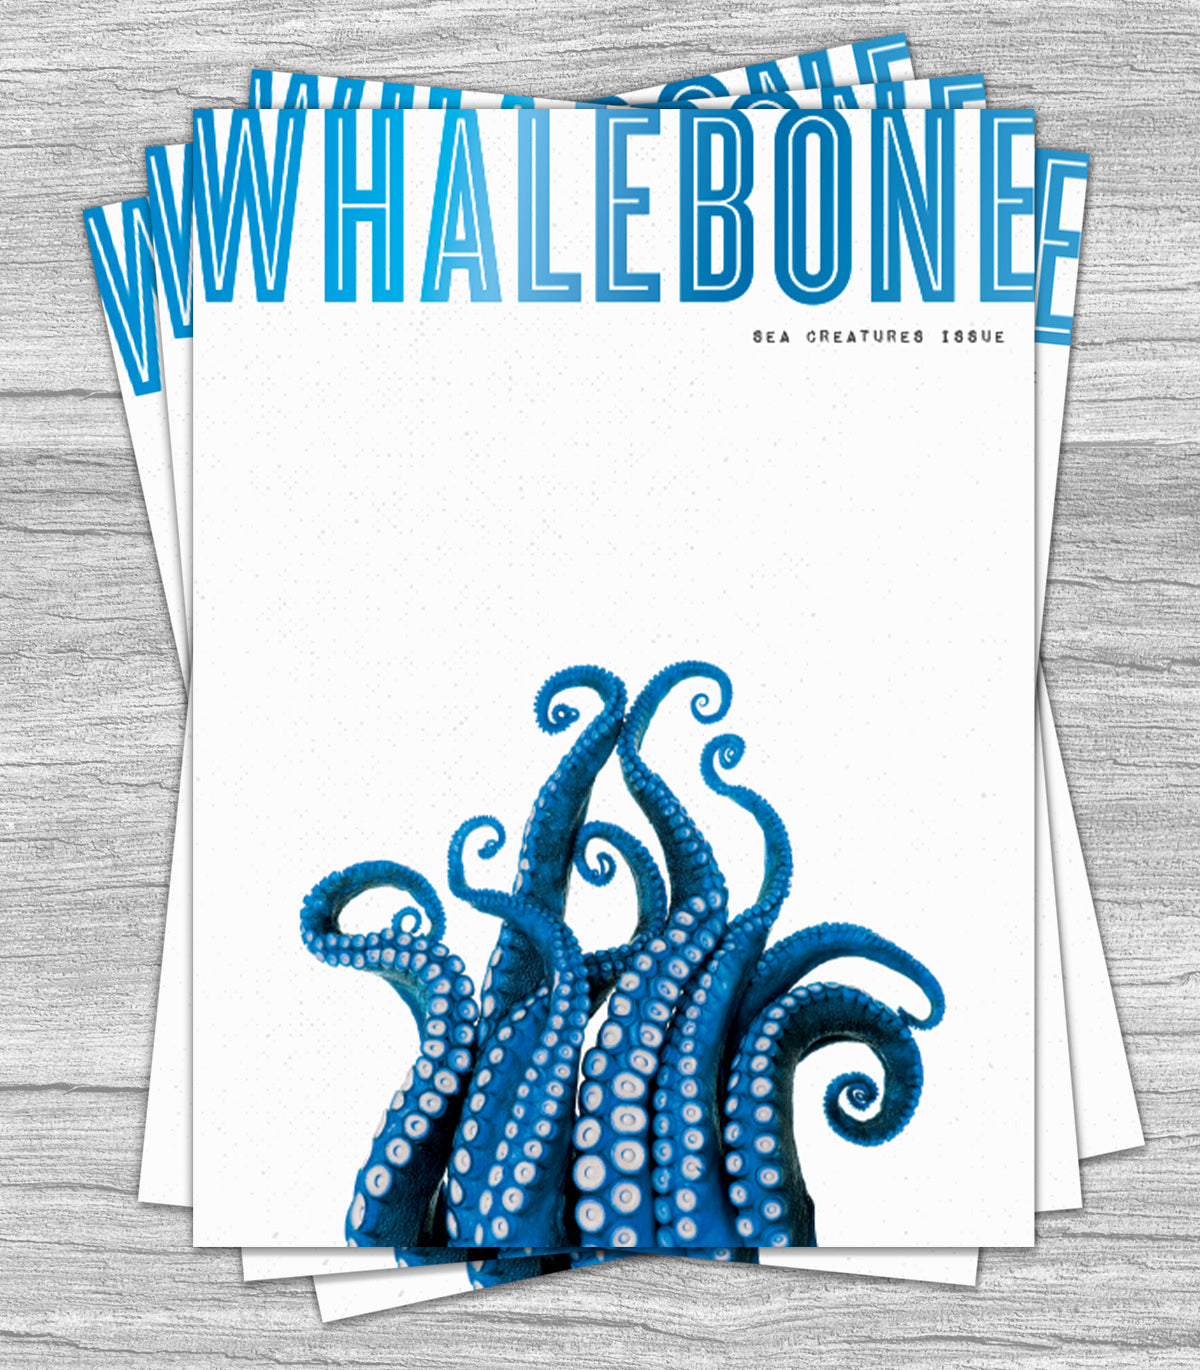 WHALEBONE - THE SEA CREATURES ISSUE: VOLUME 7 – ISSUE 3